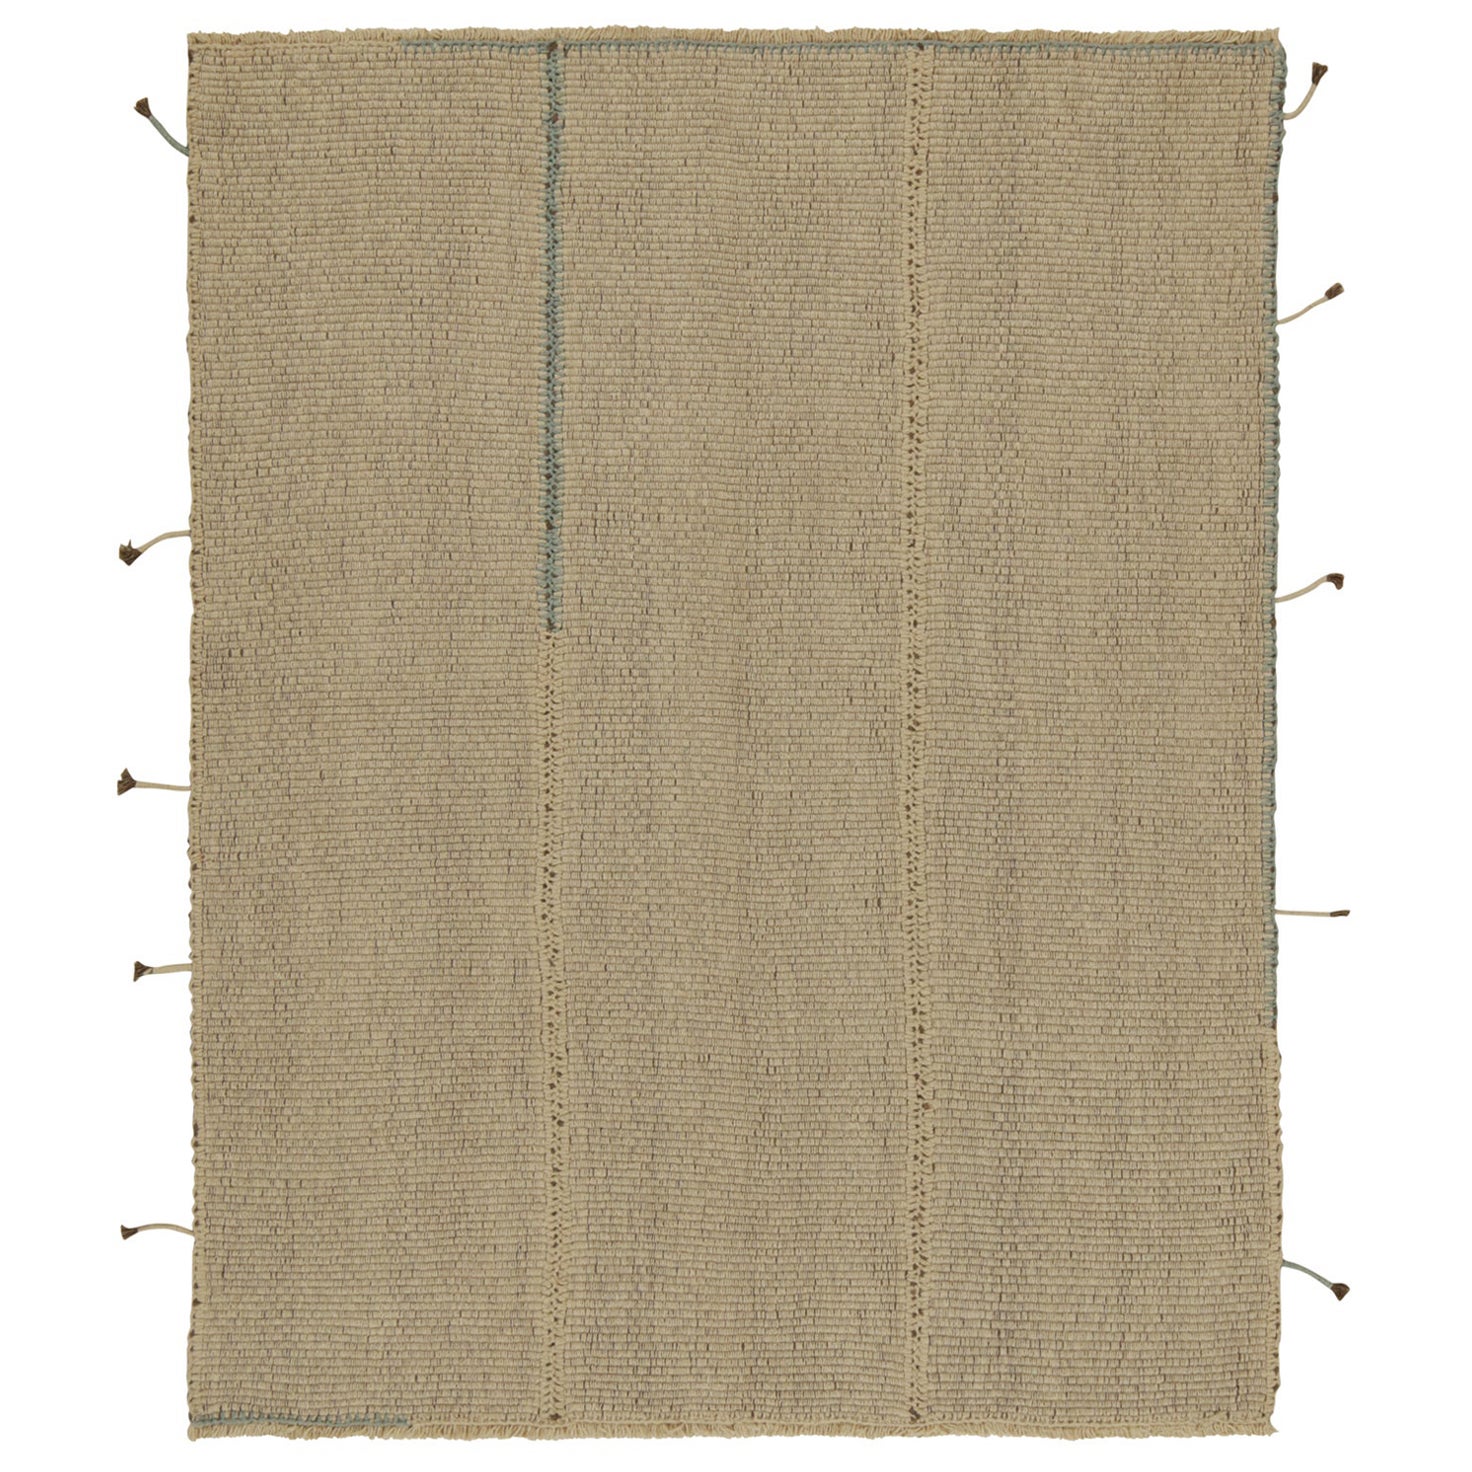 Rug & Kilim’s Contemporary Kilim in Beige with Blue Accents For Sale